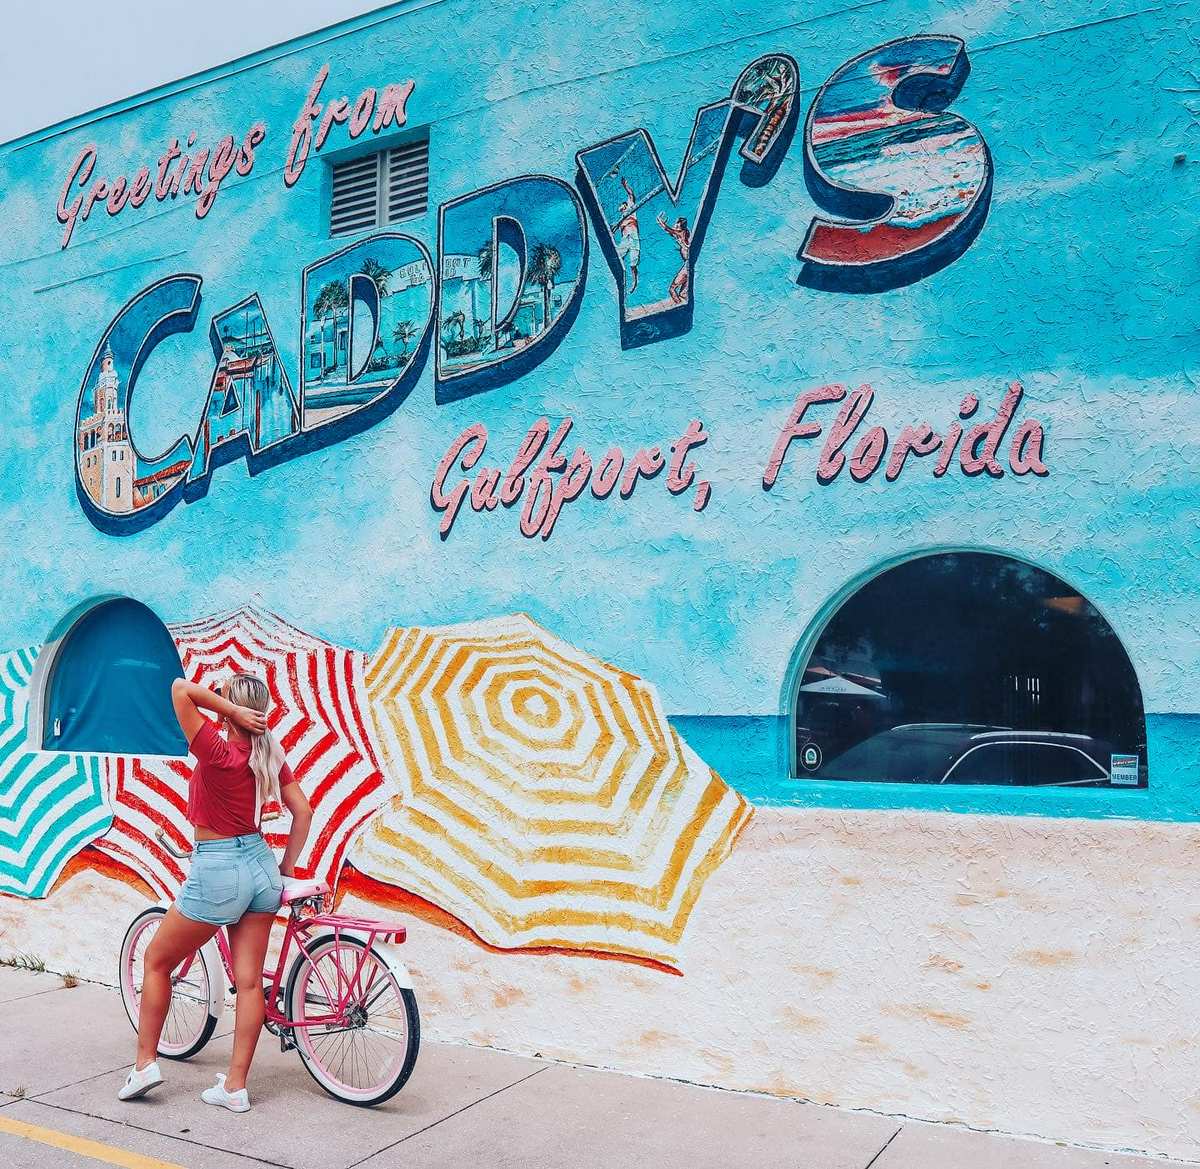 Greetings from Caddys Gulfport, Florida mural